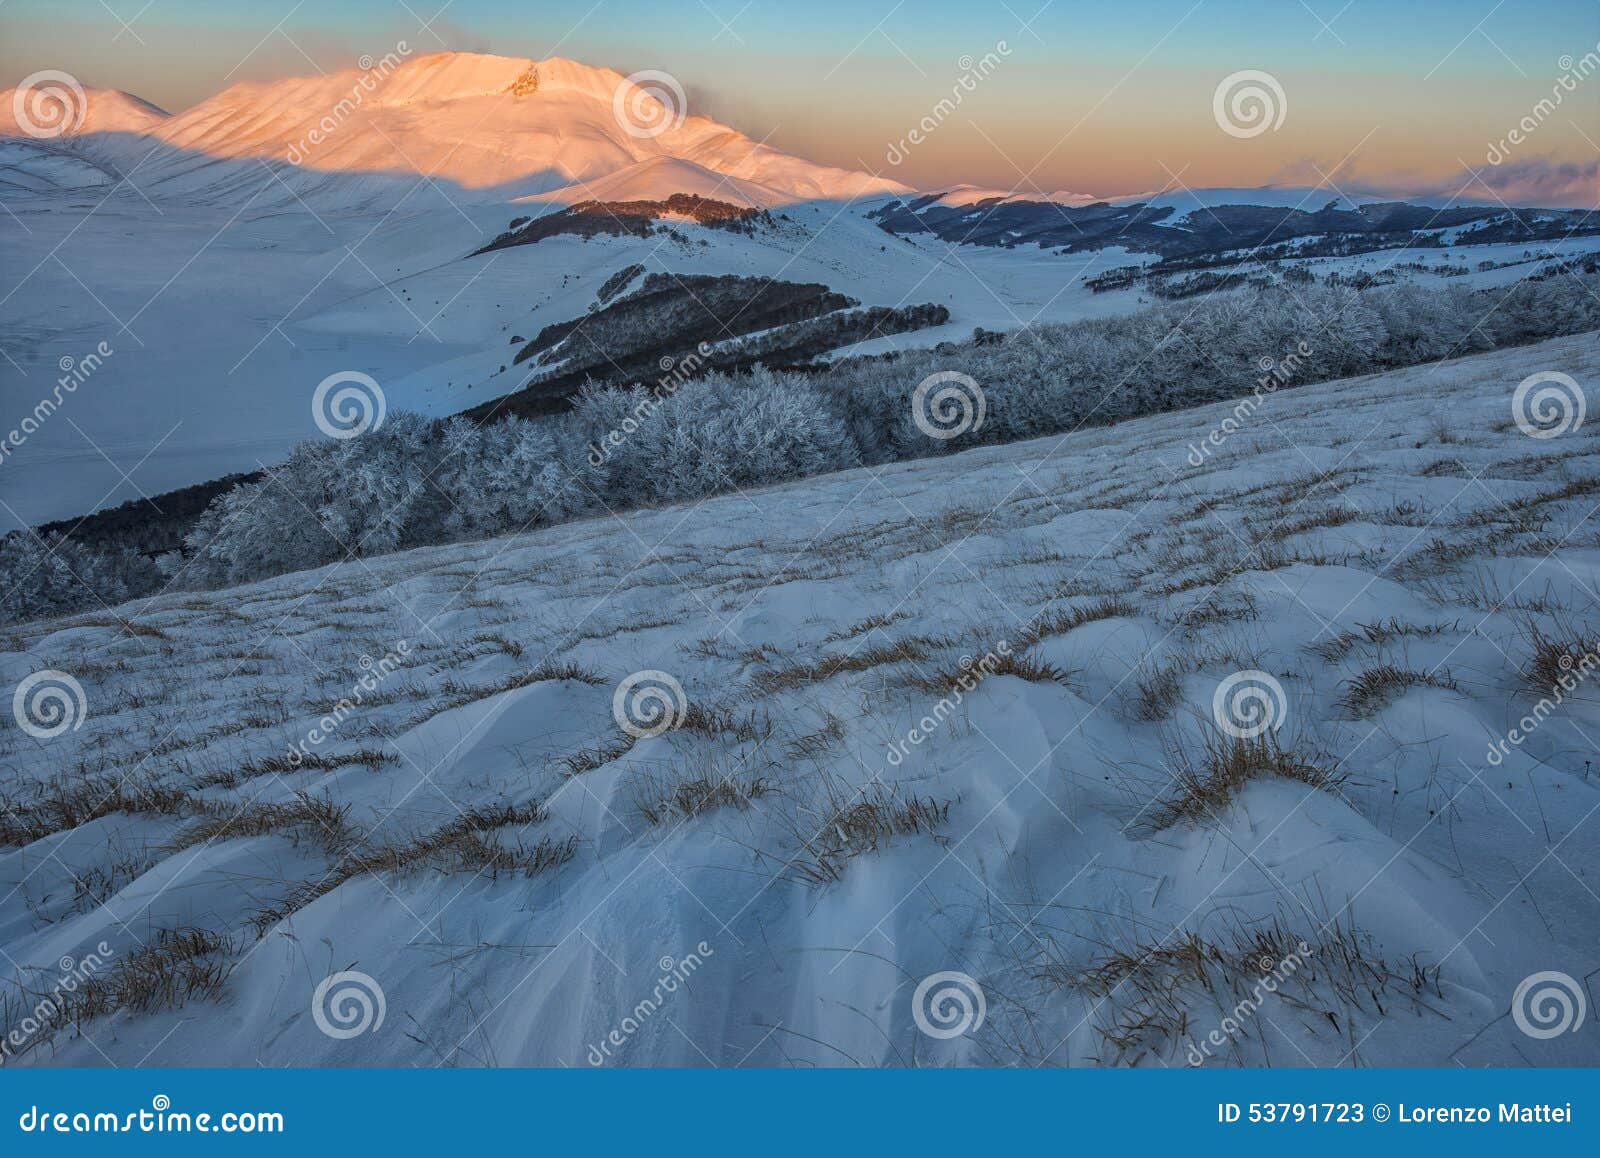 mount vettore at sunset, winter day with snow, sibillini mountains np, umbria, italy